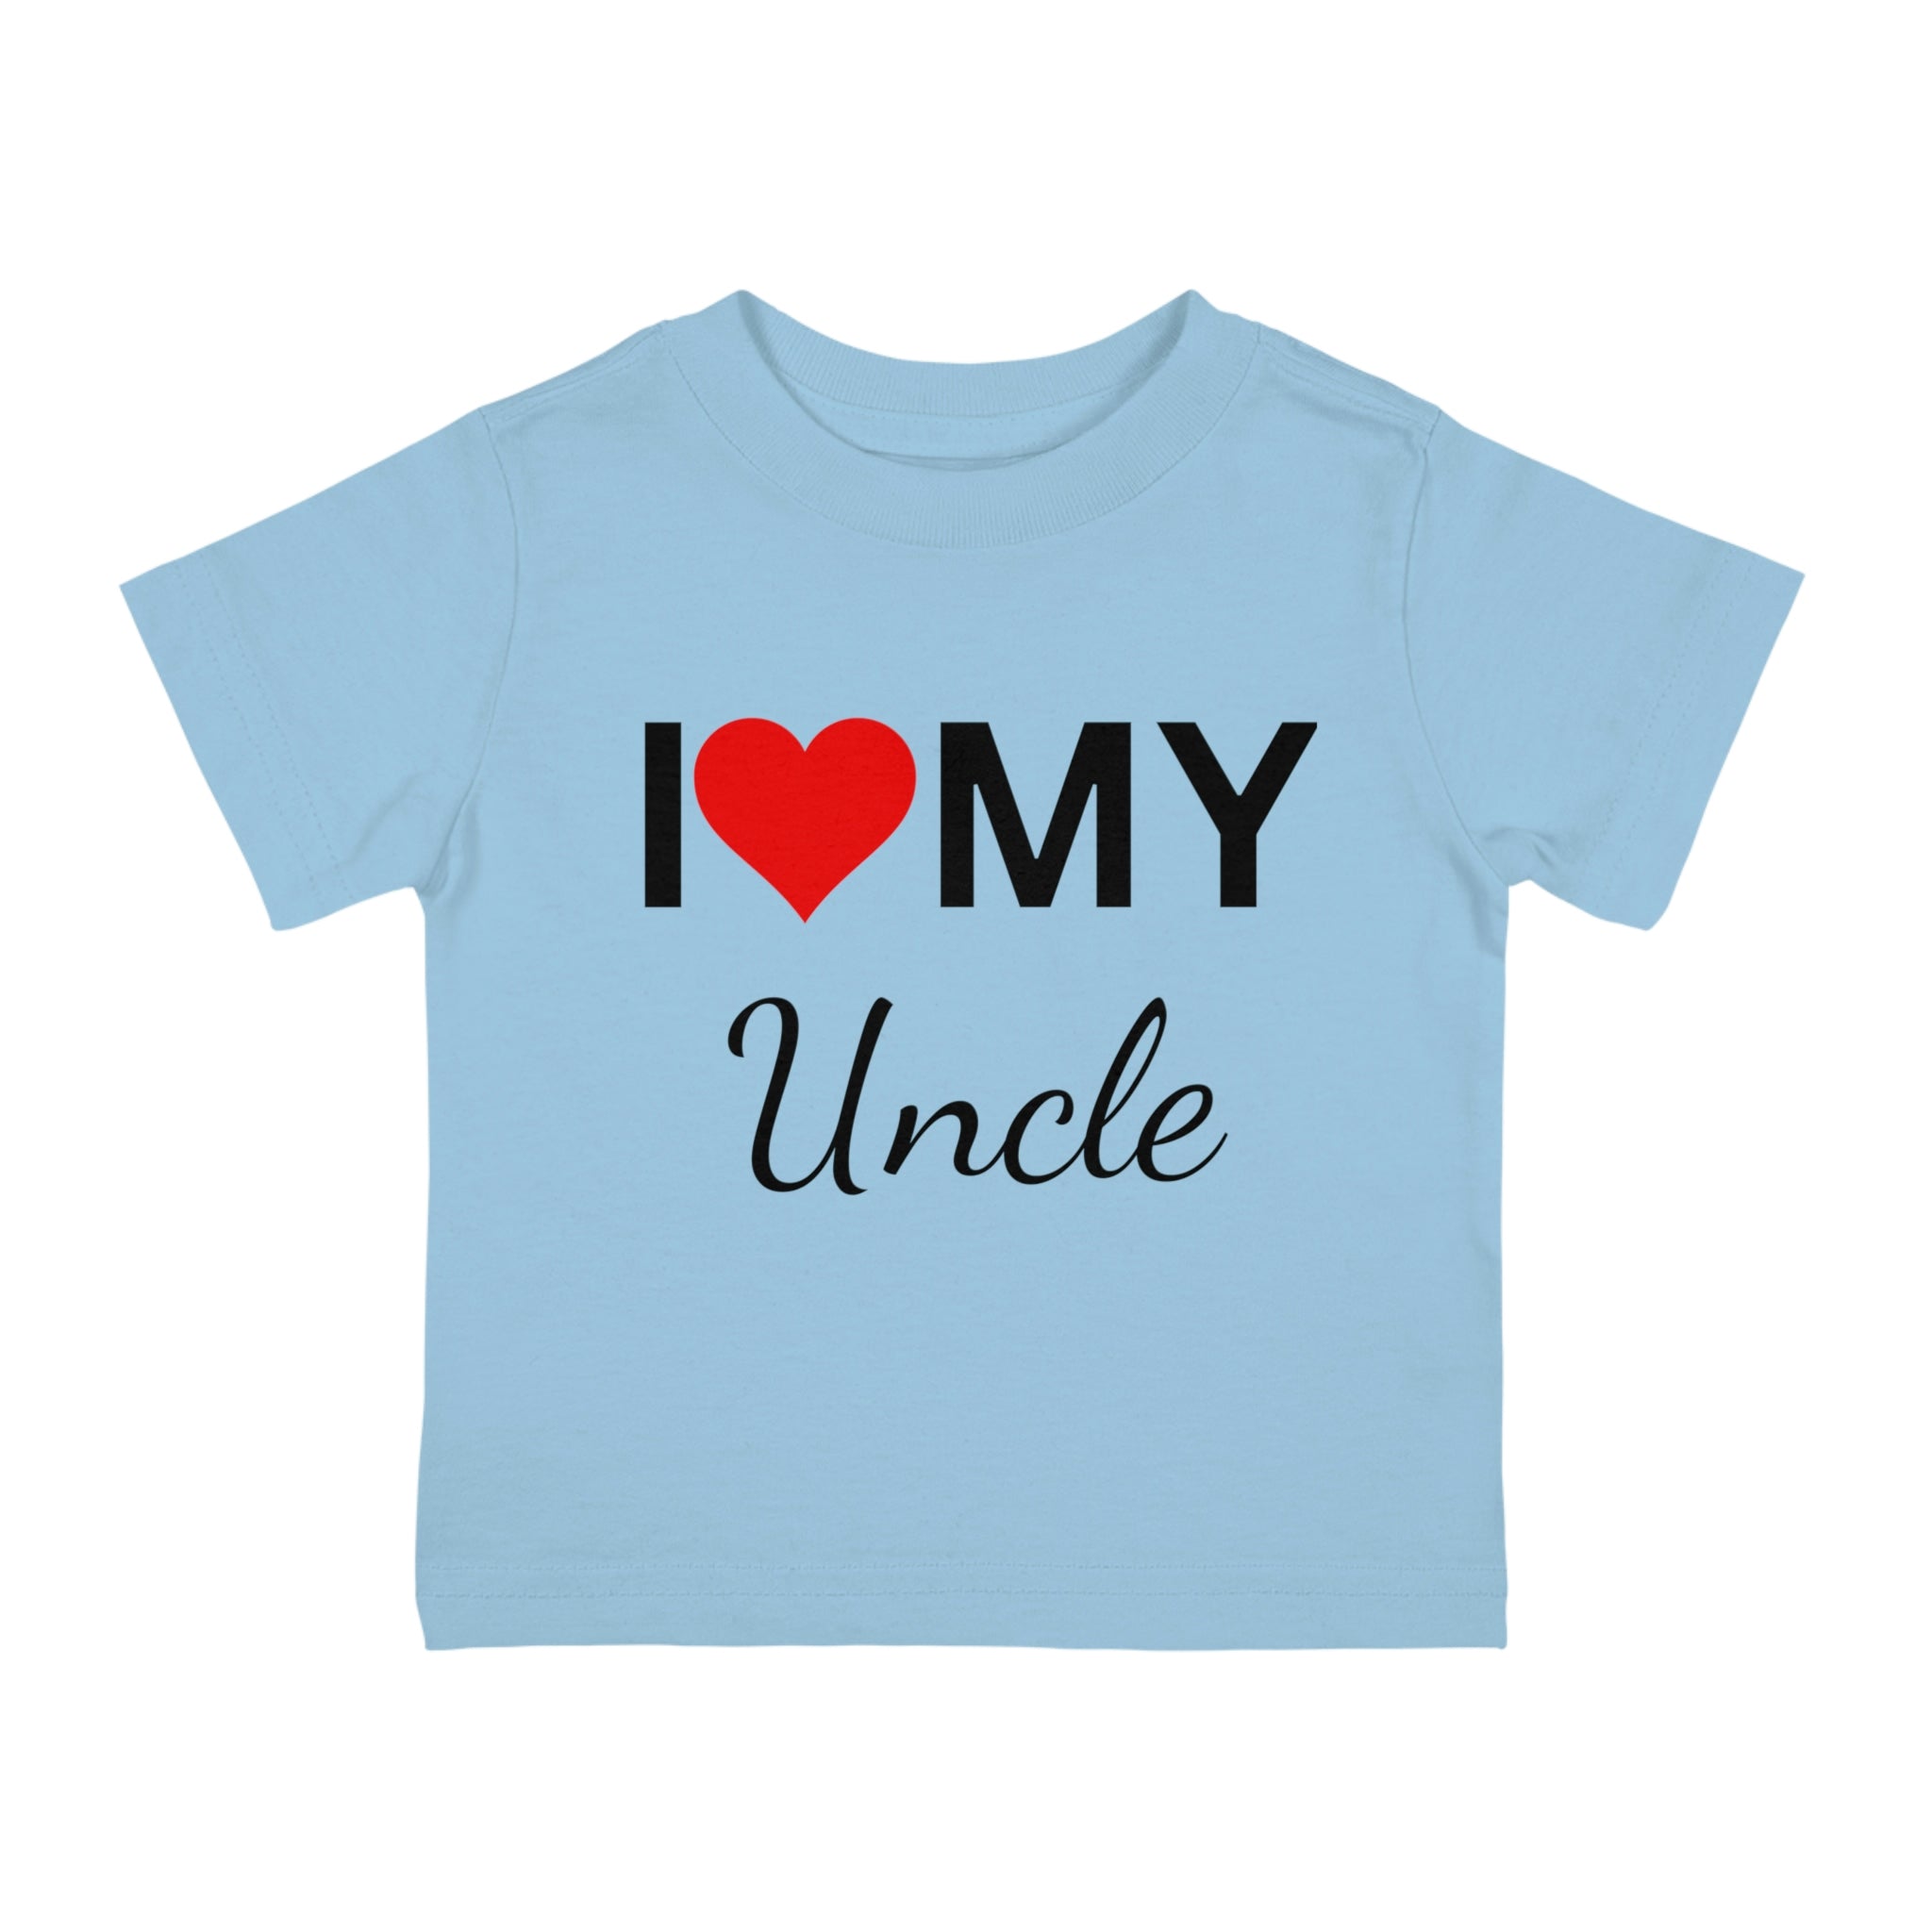 I Love My Uncle Infant Shirt, Baby Tee, Infant Tee